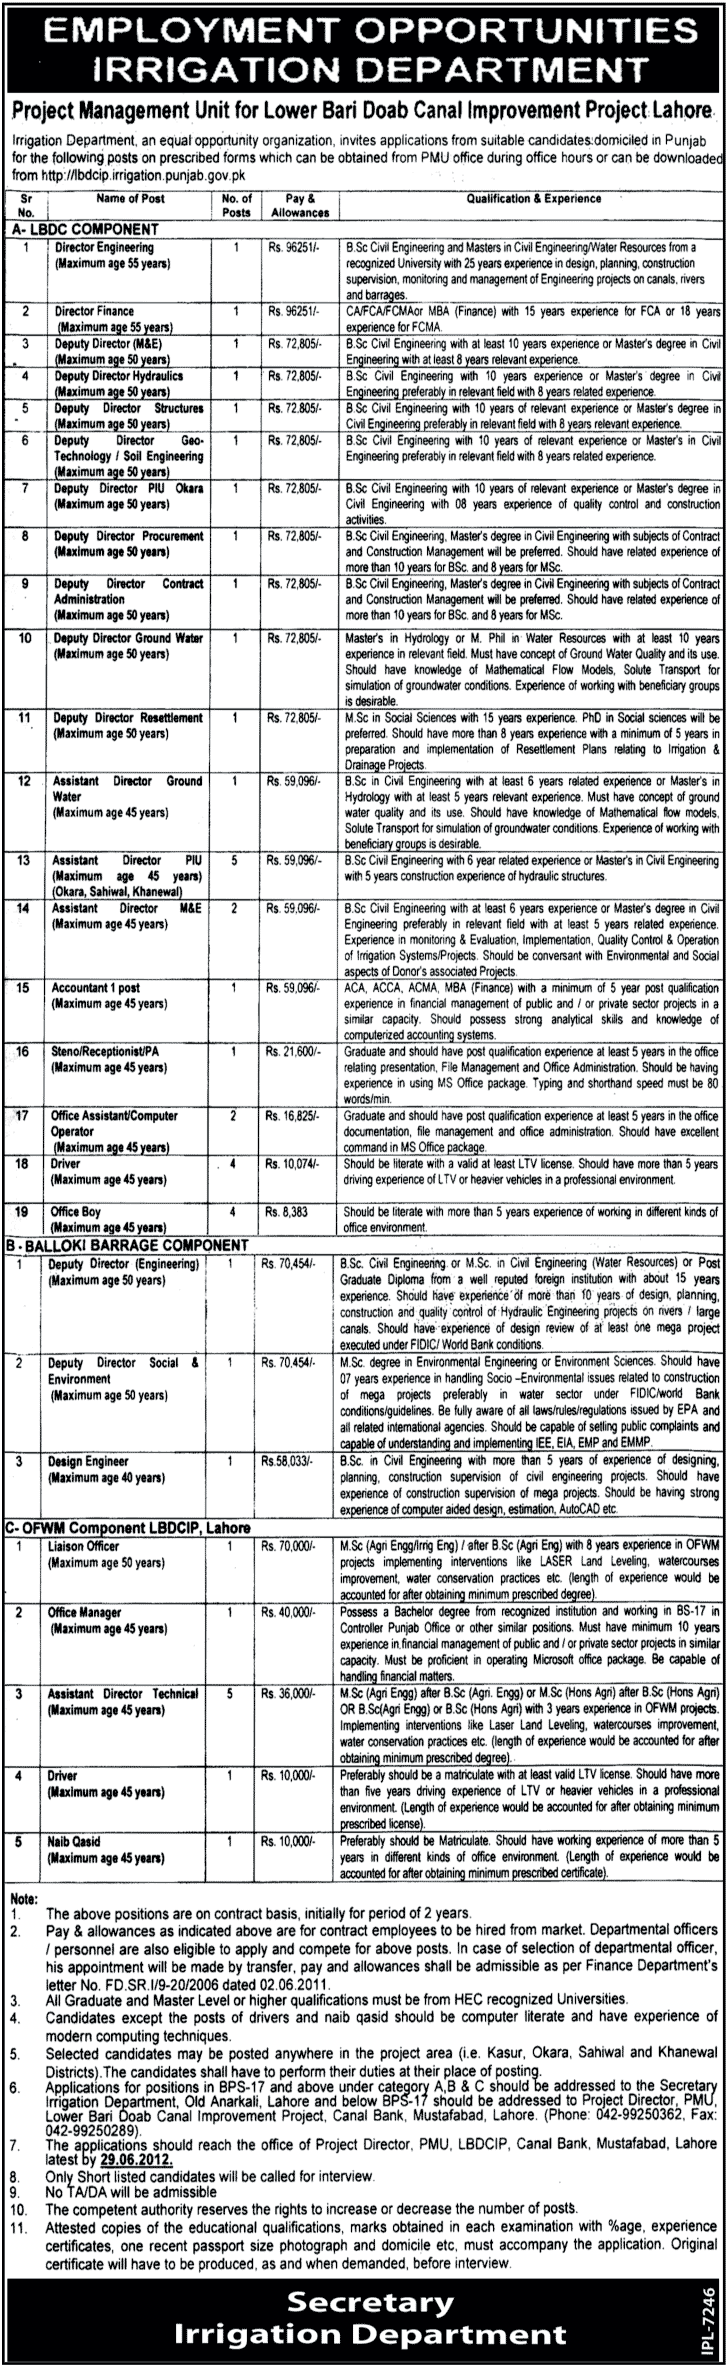 Directors and Office Supporting Staff Required at Irrigation Department (Govt. job)